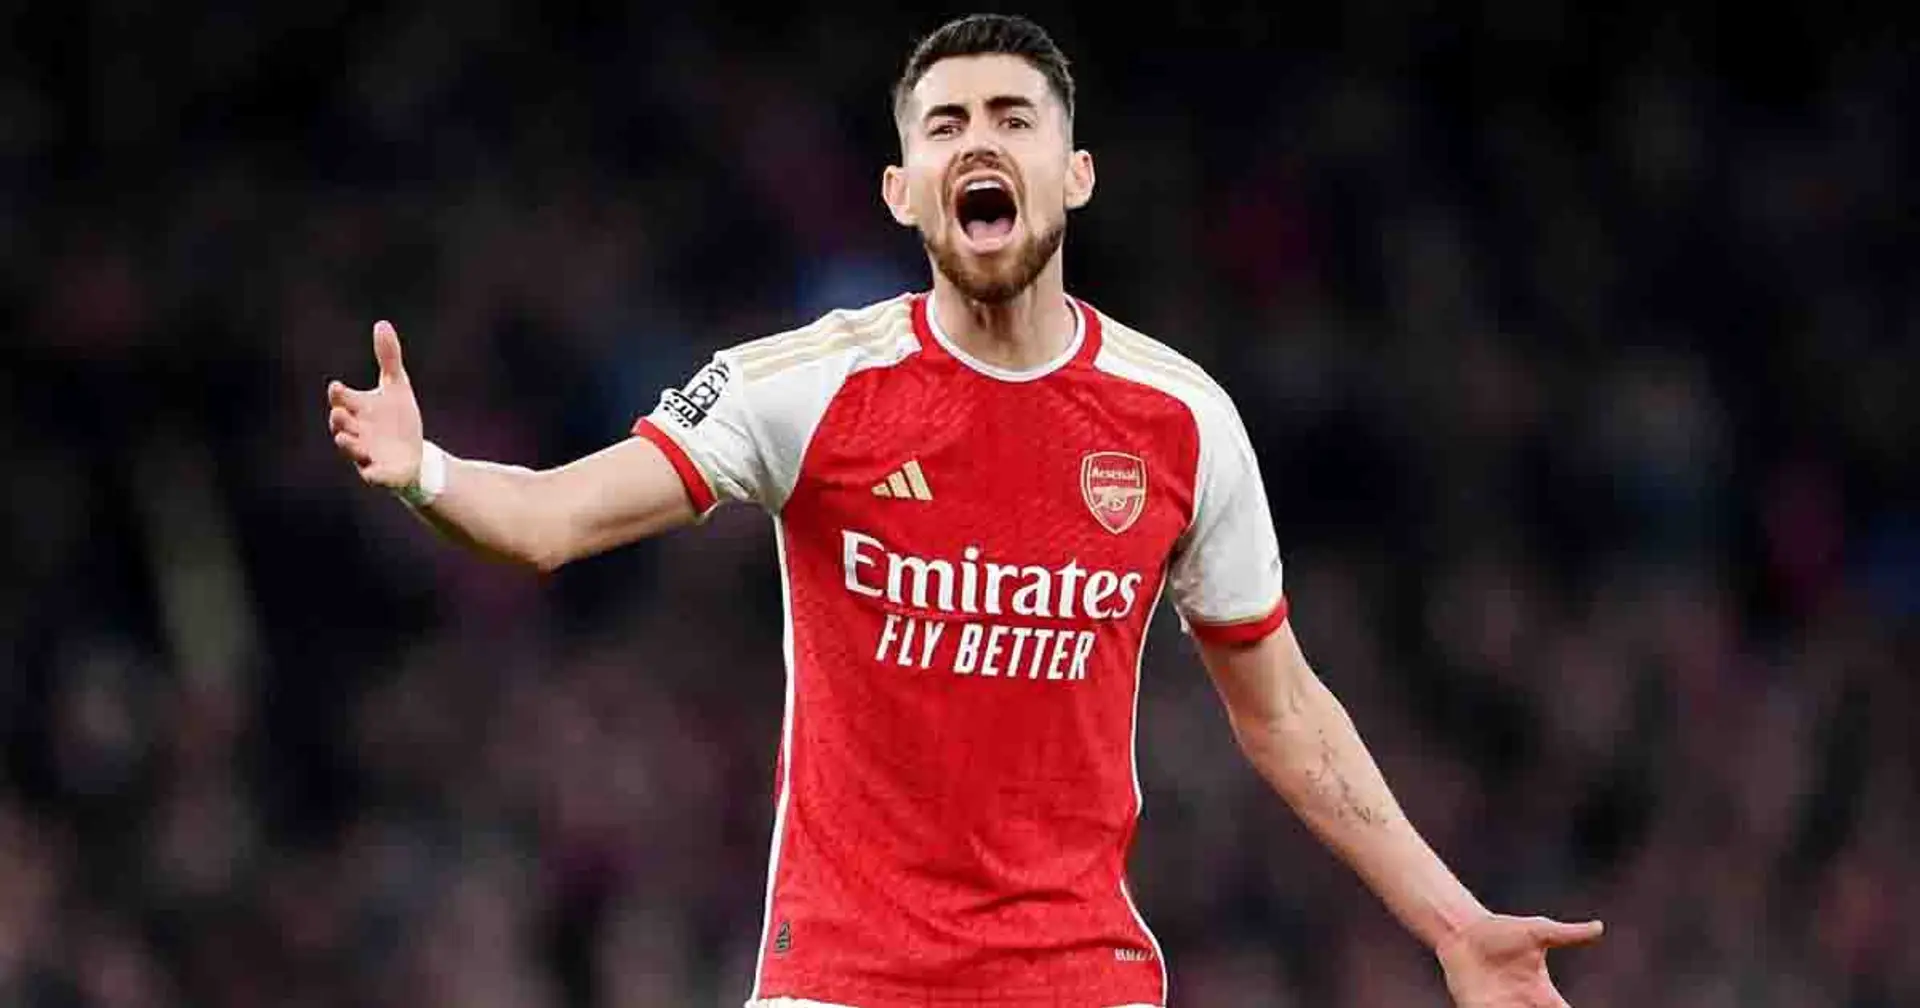 Jorginho opens talks with Arsenal over new contract, also considering alternative summer options